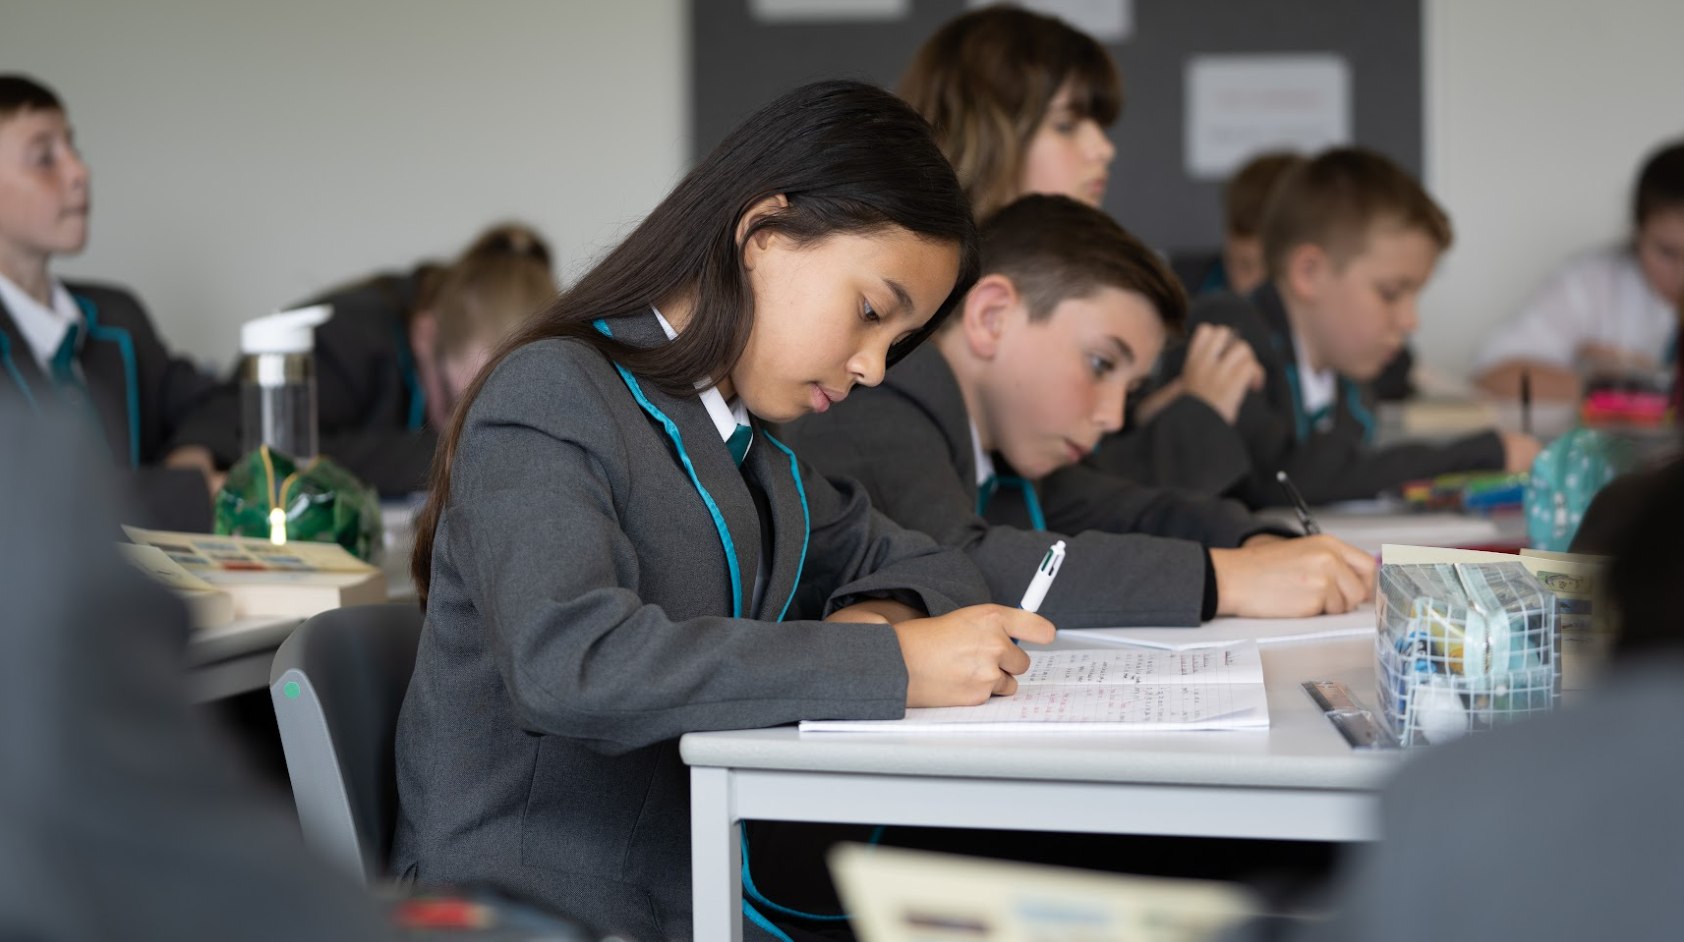 A group of students are seen sitting at their desks in a classroom, writing in their exercise books and wearing their school uniform.